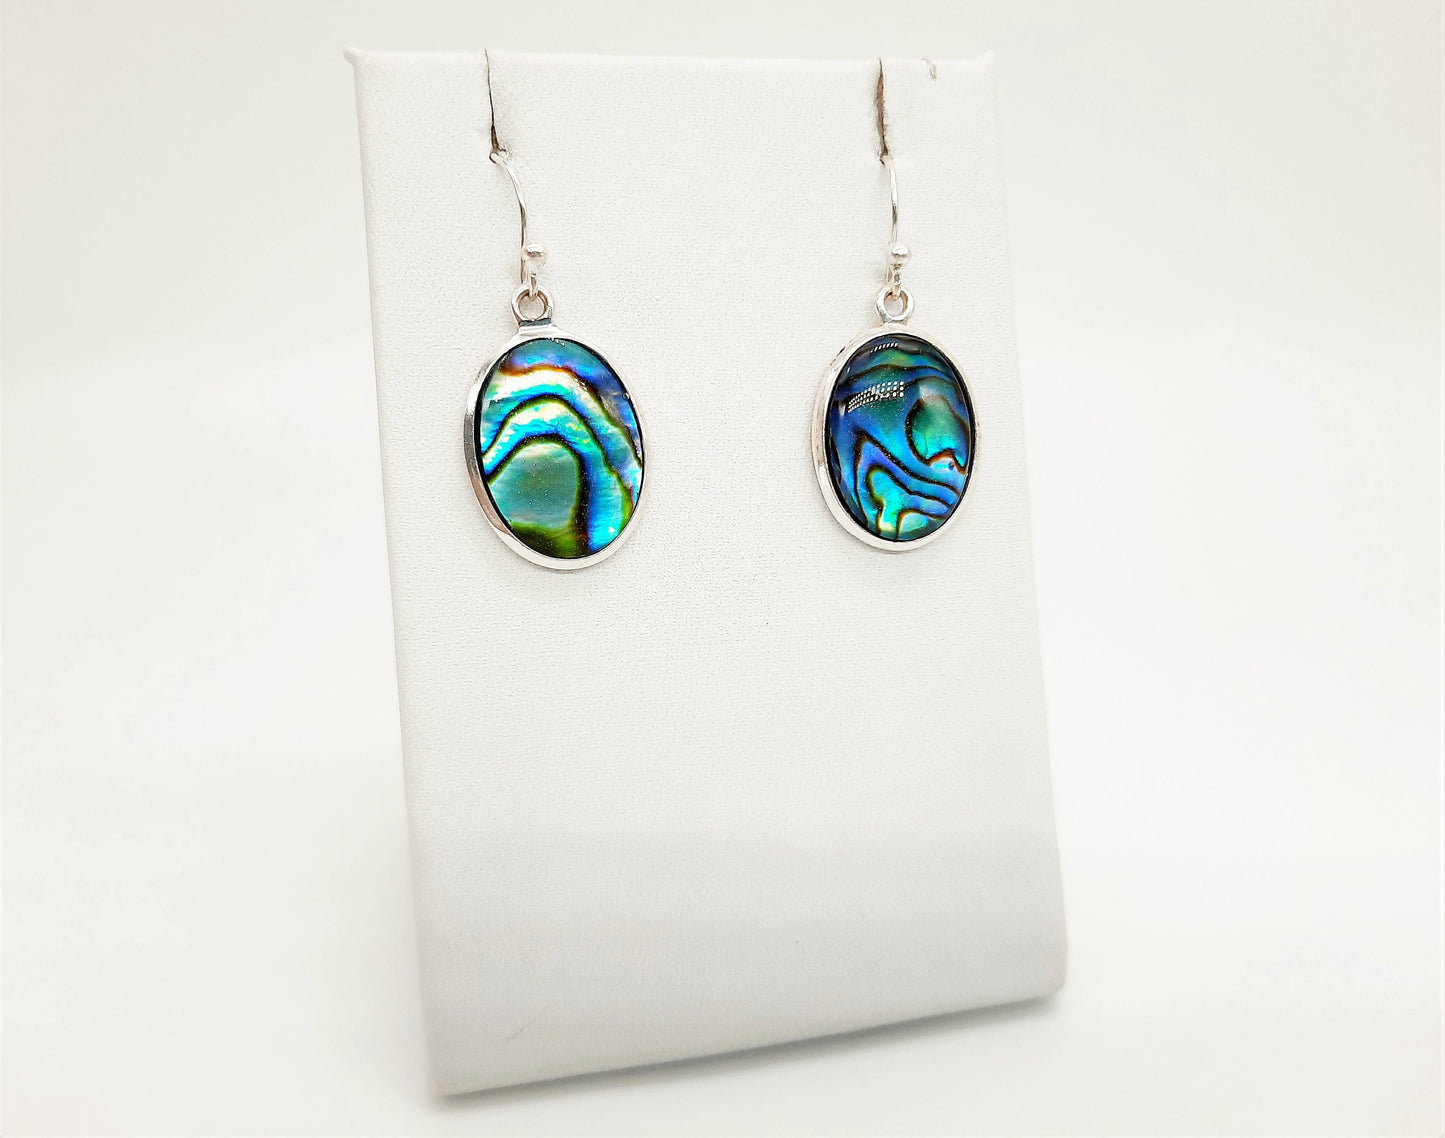 Handmade / Handcrafted 925 Sterling Silver Natural Abalone / Paua Seashell Necklace & Earring Set, Sealed w/ Holographic Mica Infused Resin